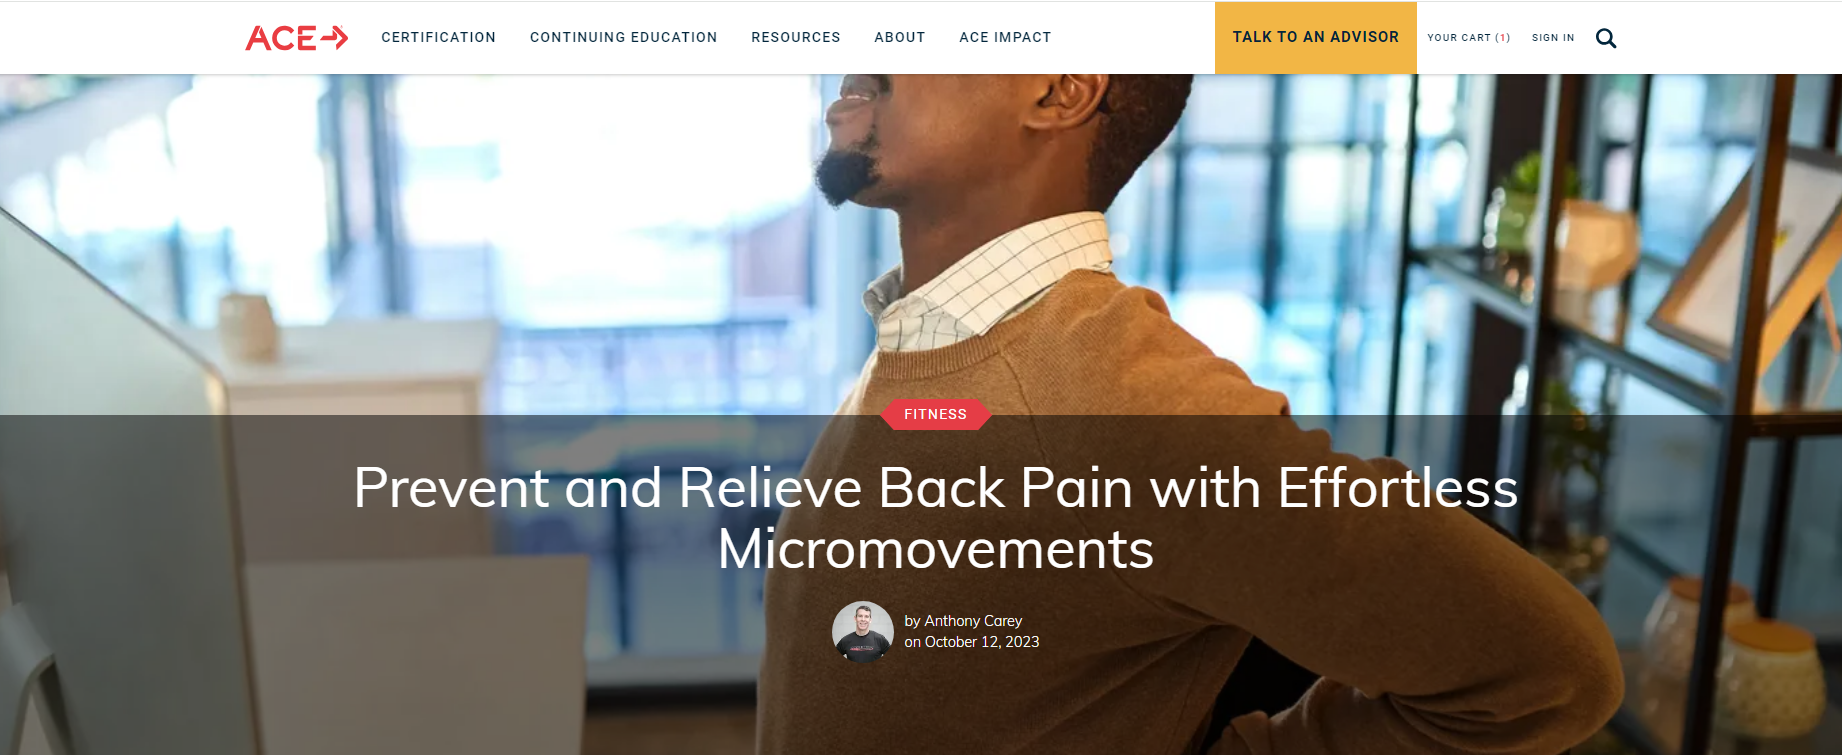 American Council on Exercise-Prevent and Relieve Back Pain with Micromovements